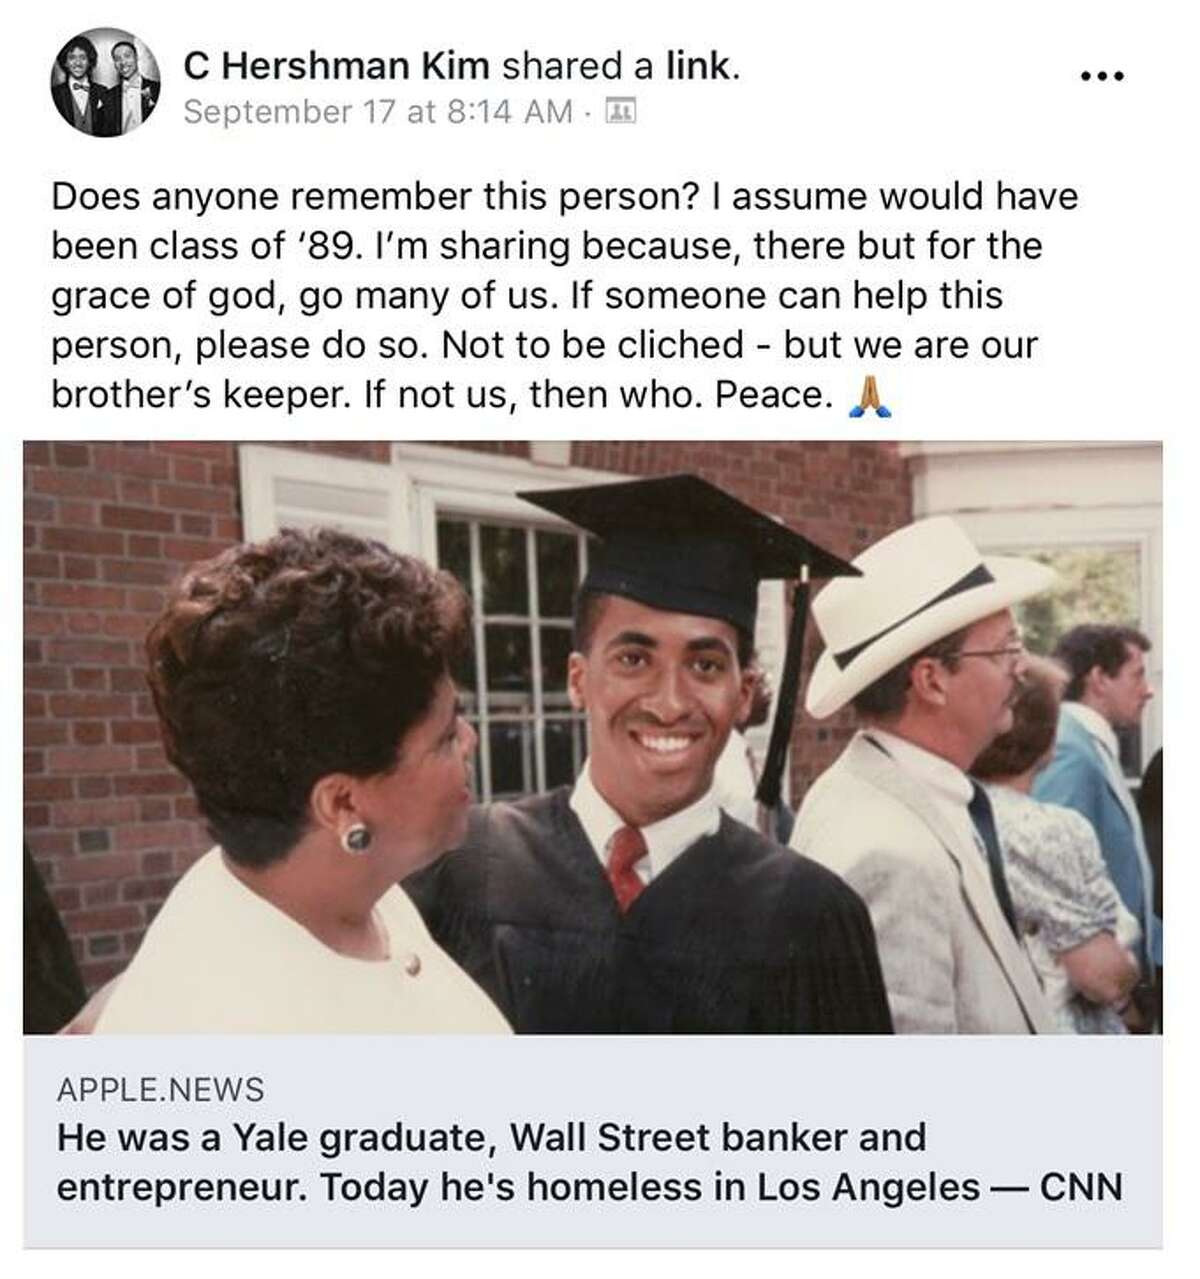 Kim Hershman posted this alert on Facebook just after hearing about the CNN story about Shawn Pleasants, a fellow Yale University alumn, living homeless in Los Angeles.